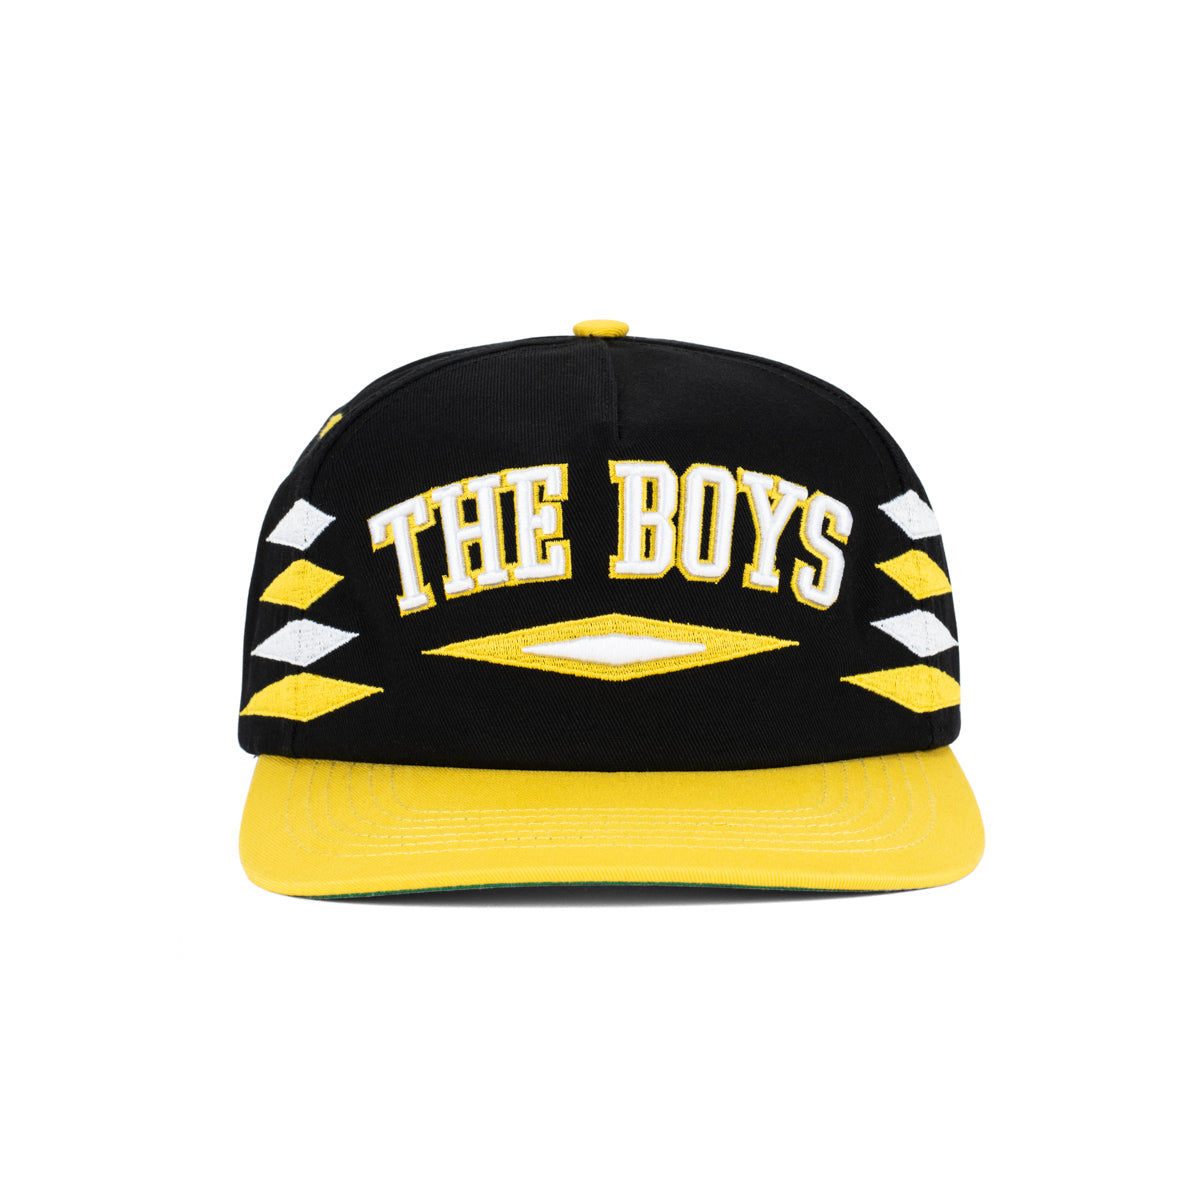 black and yellow hat